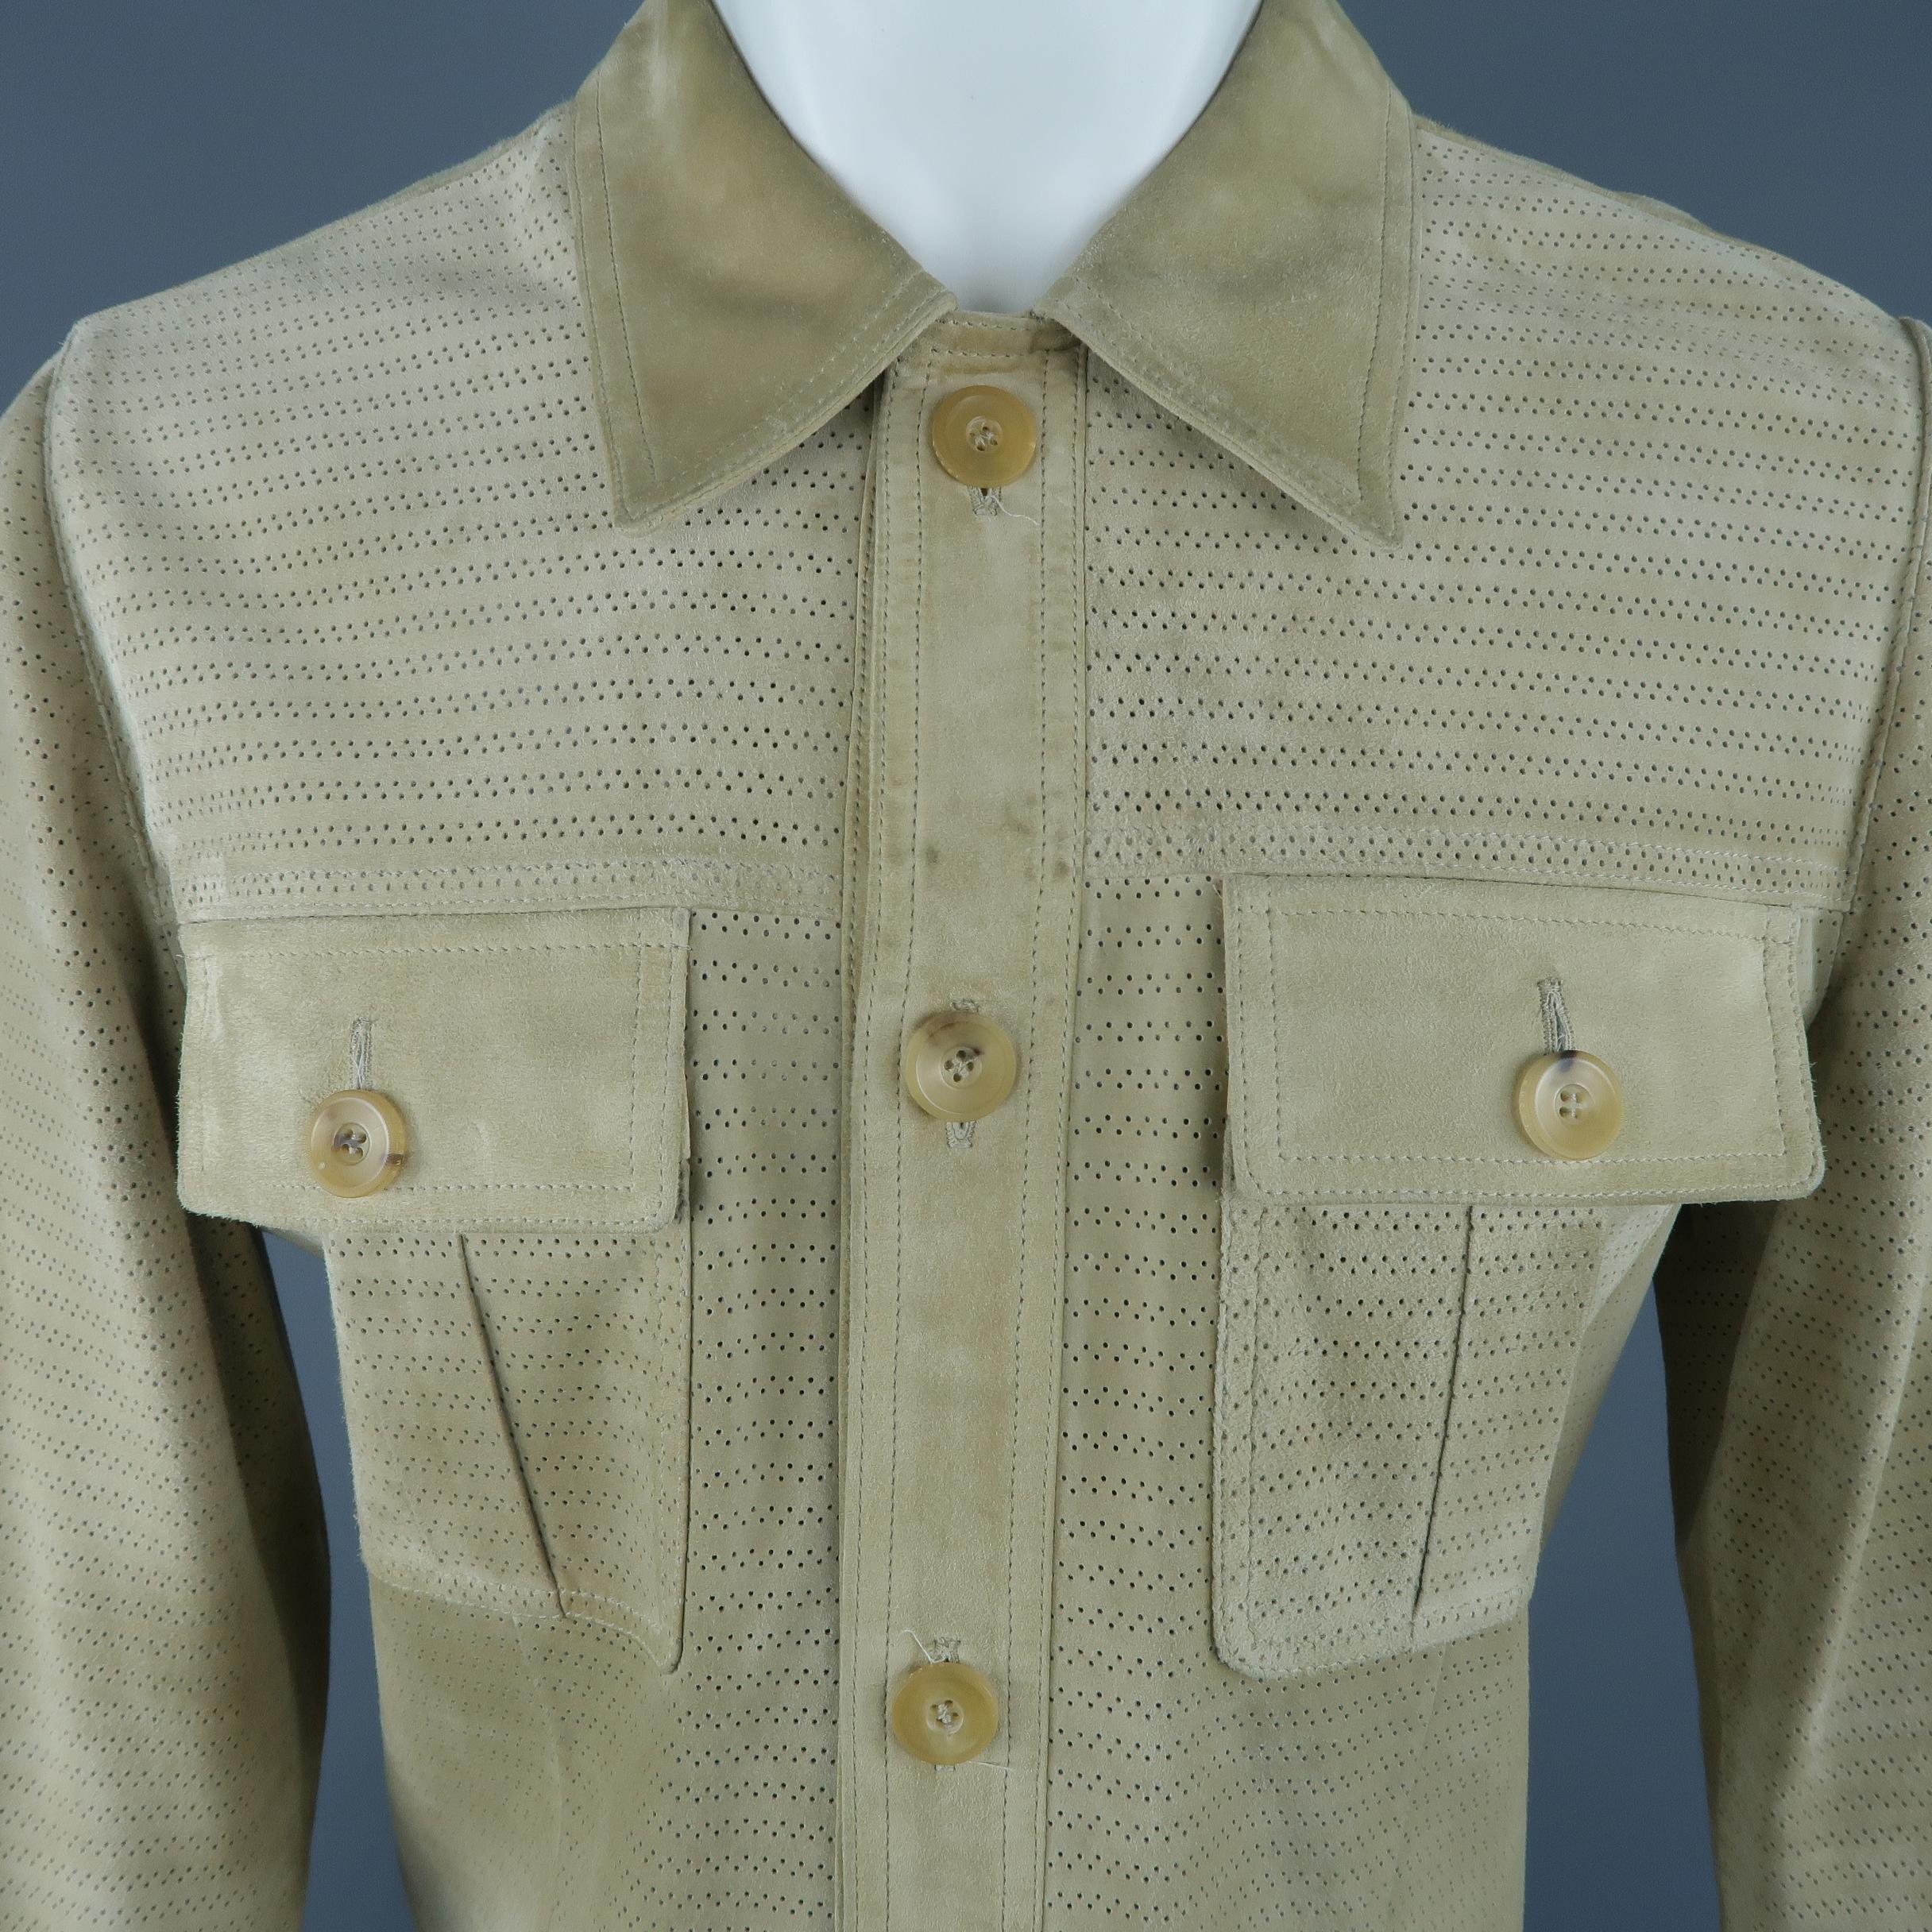 Archive GUCCI by TOM FORD jacket comes in perforated beige suede with a pointed collar, button up front, and four patch flap safari jacket pockets. Wear and discolorations throughout. As-is. Made in Italy.
 
Fair Pre-Owned Condition.
Marked: IT 48
